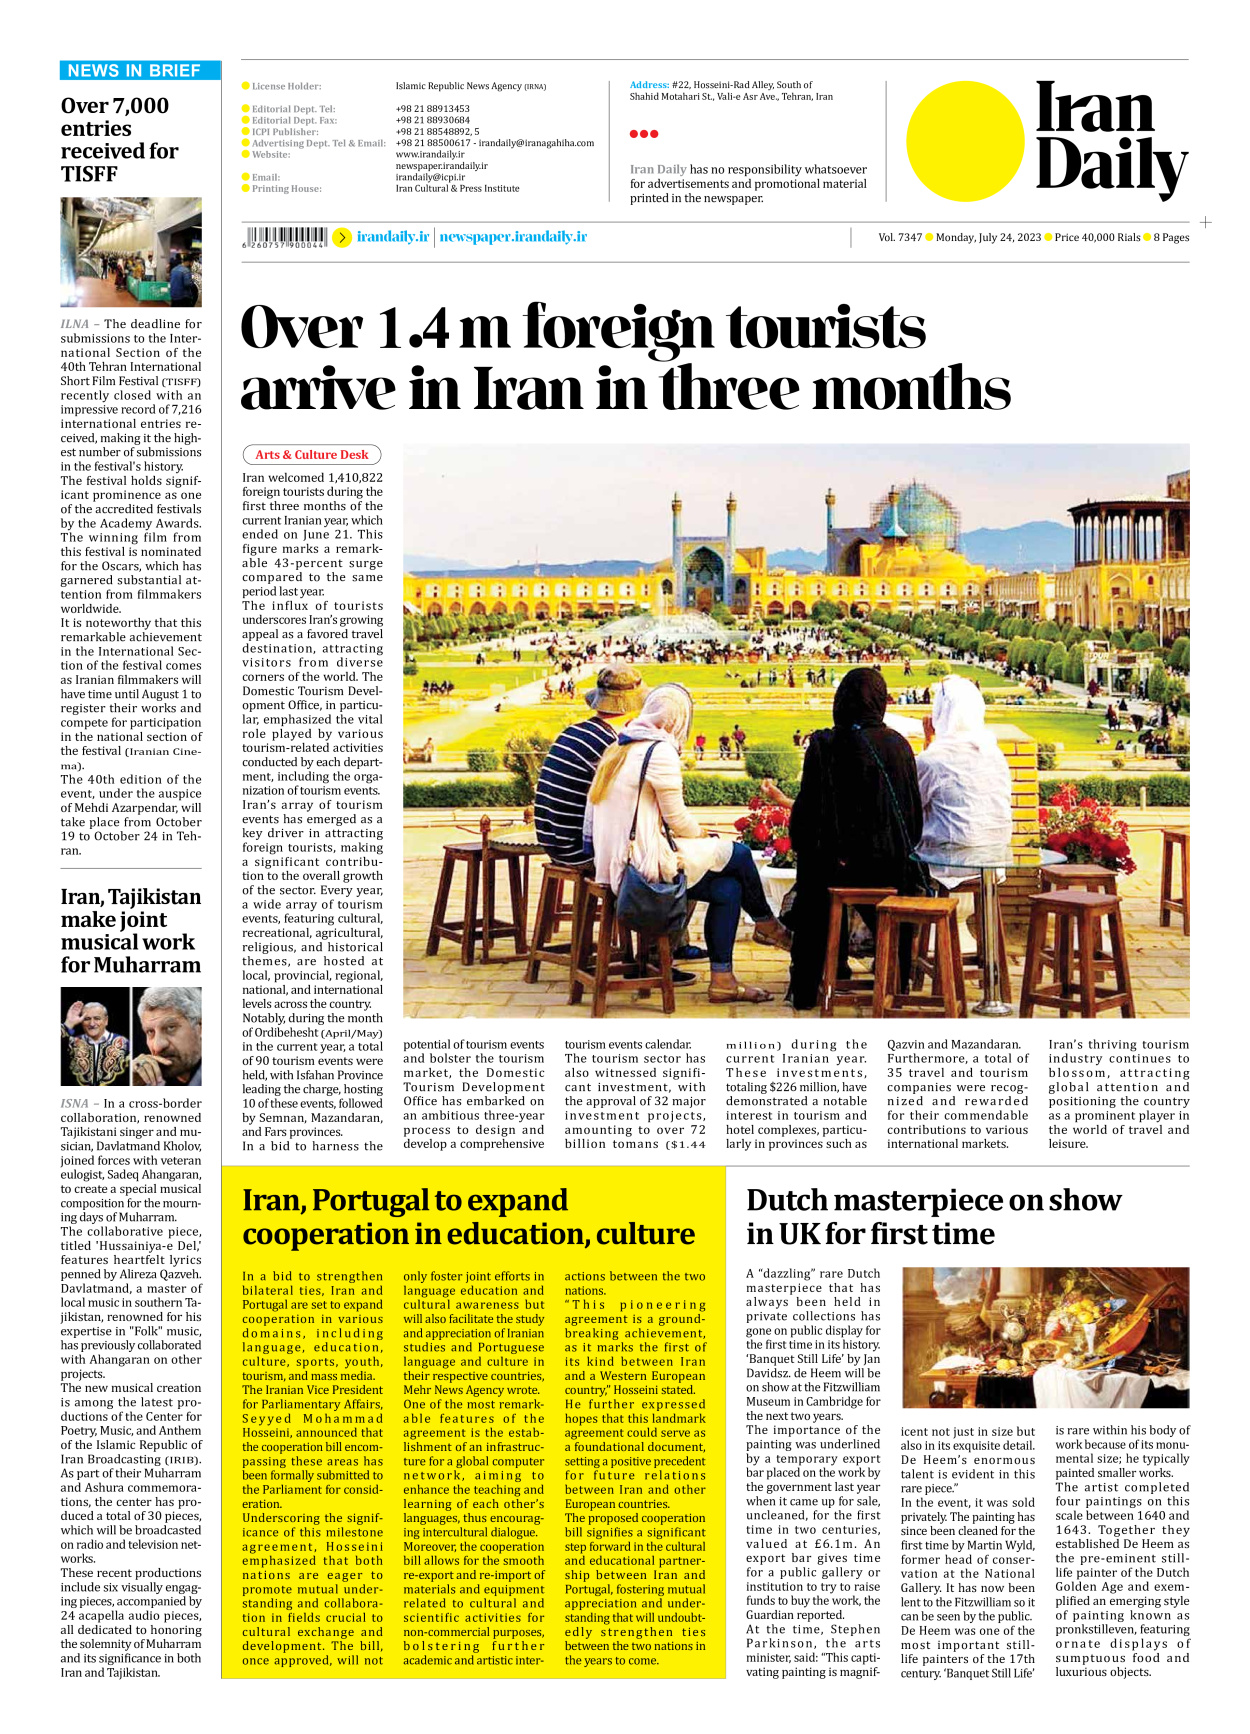 Iran Daily - Number Seven Thousand Three Hundred and Forty Seven - 24 July 2023 - Page 8